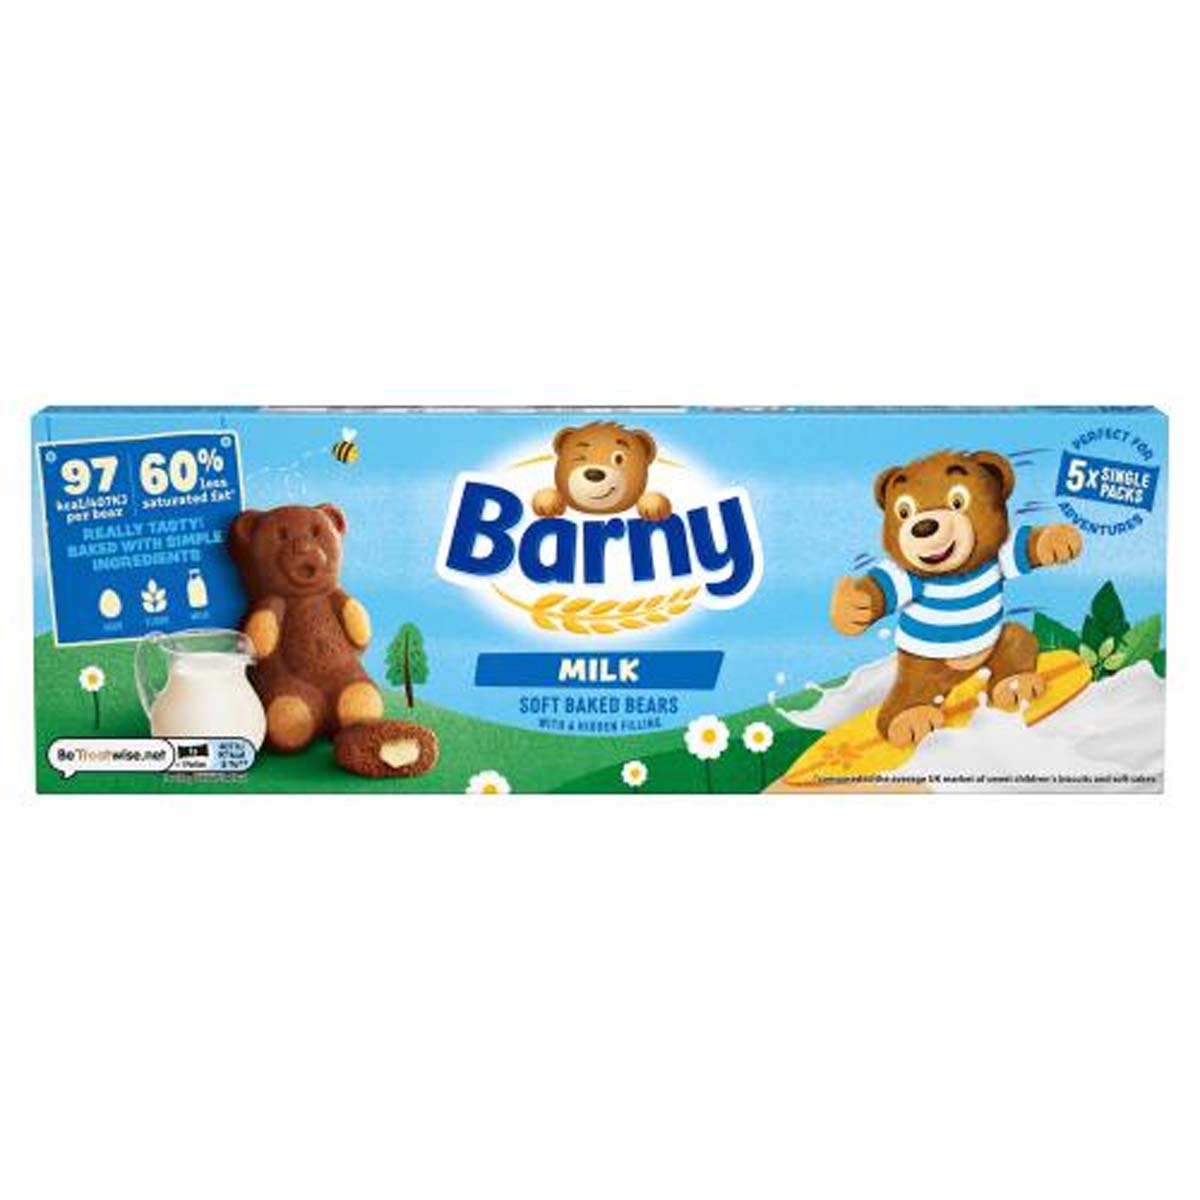 Barny - Milk Soft Baked Bears 5 Pack - 125g - Continental Food Store